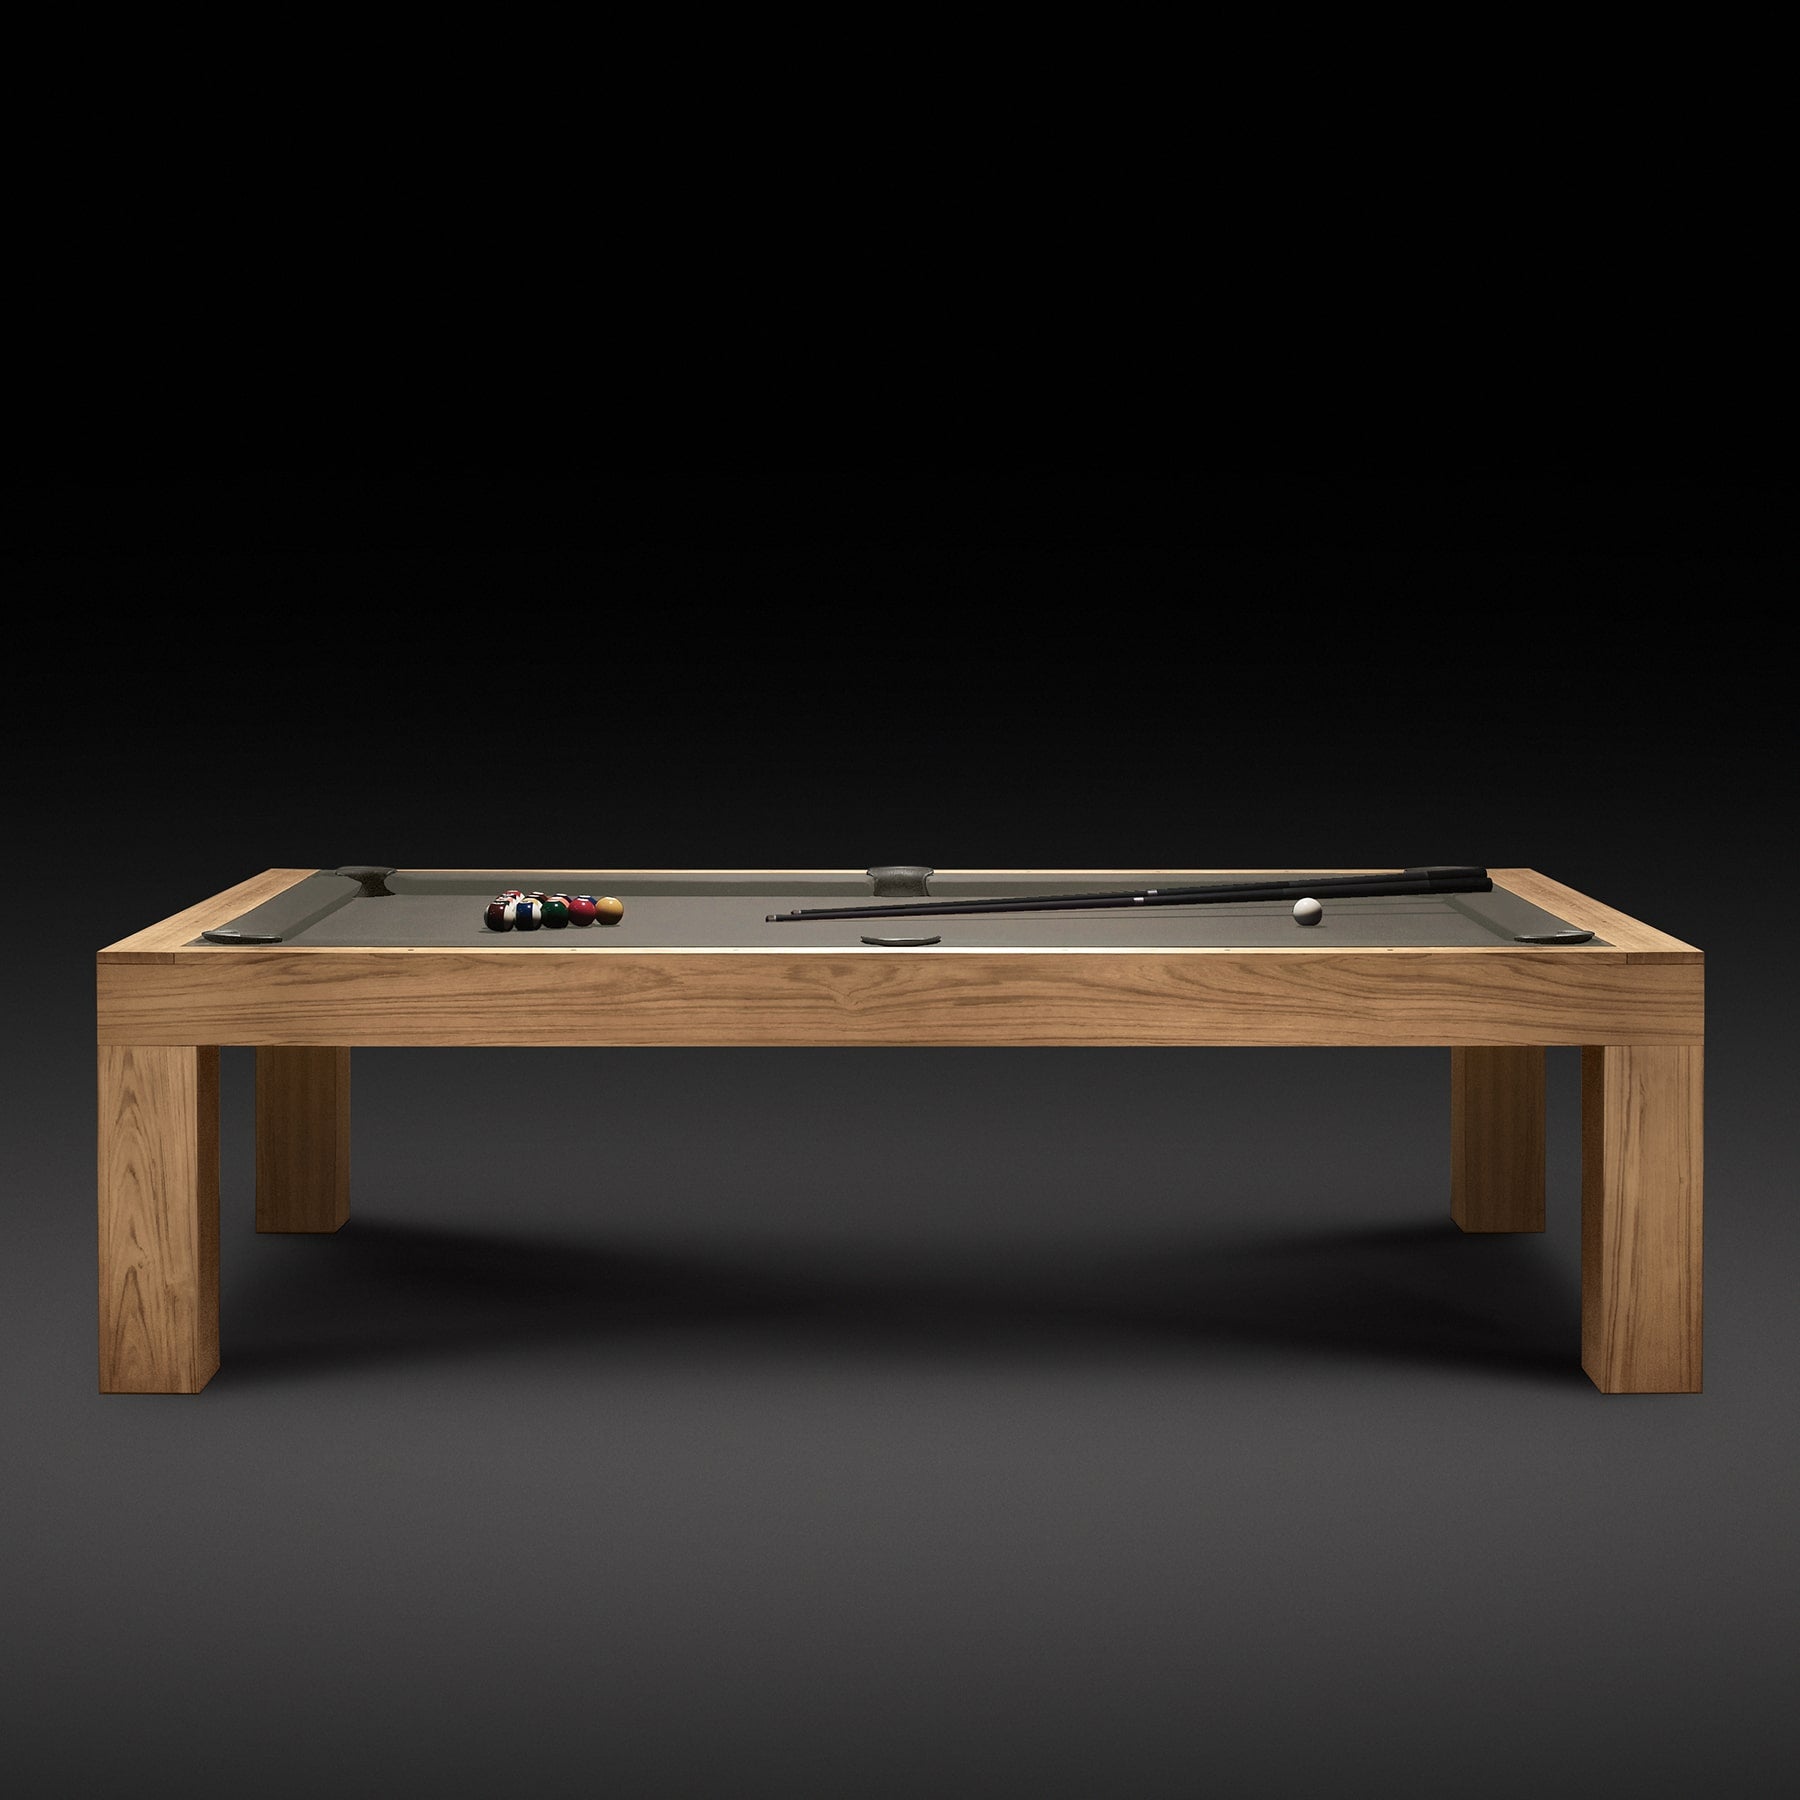 Limited Edition Pool Table - Felt Souris | James Perse Los Angeles